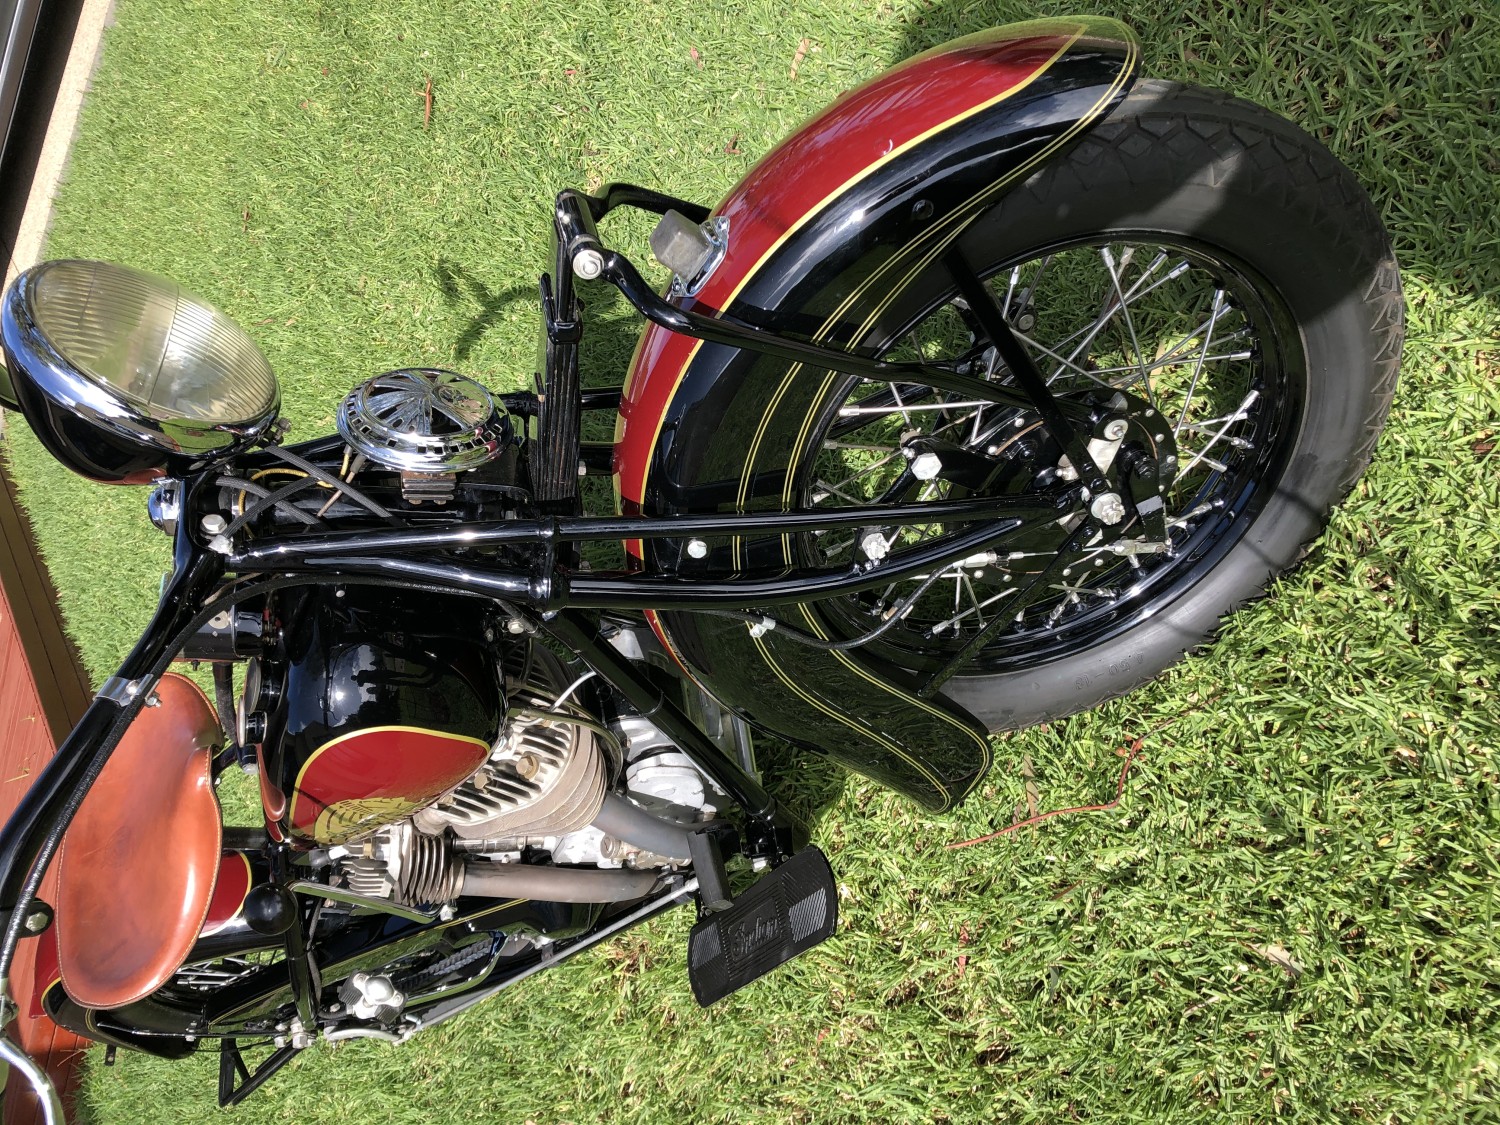 1935 Indian Chief 2020 Shannons Club Online Show And Shine 